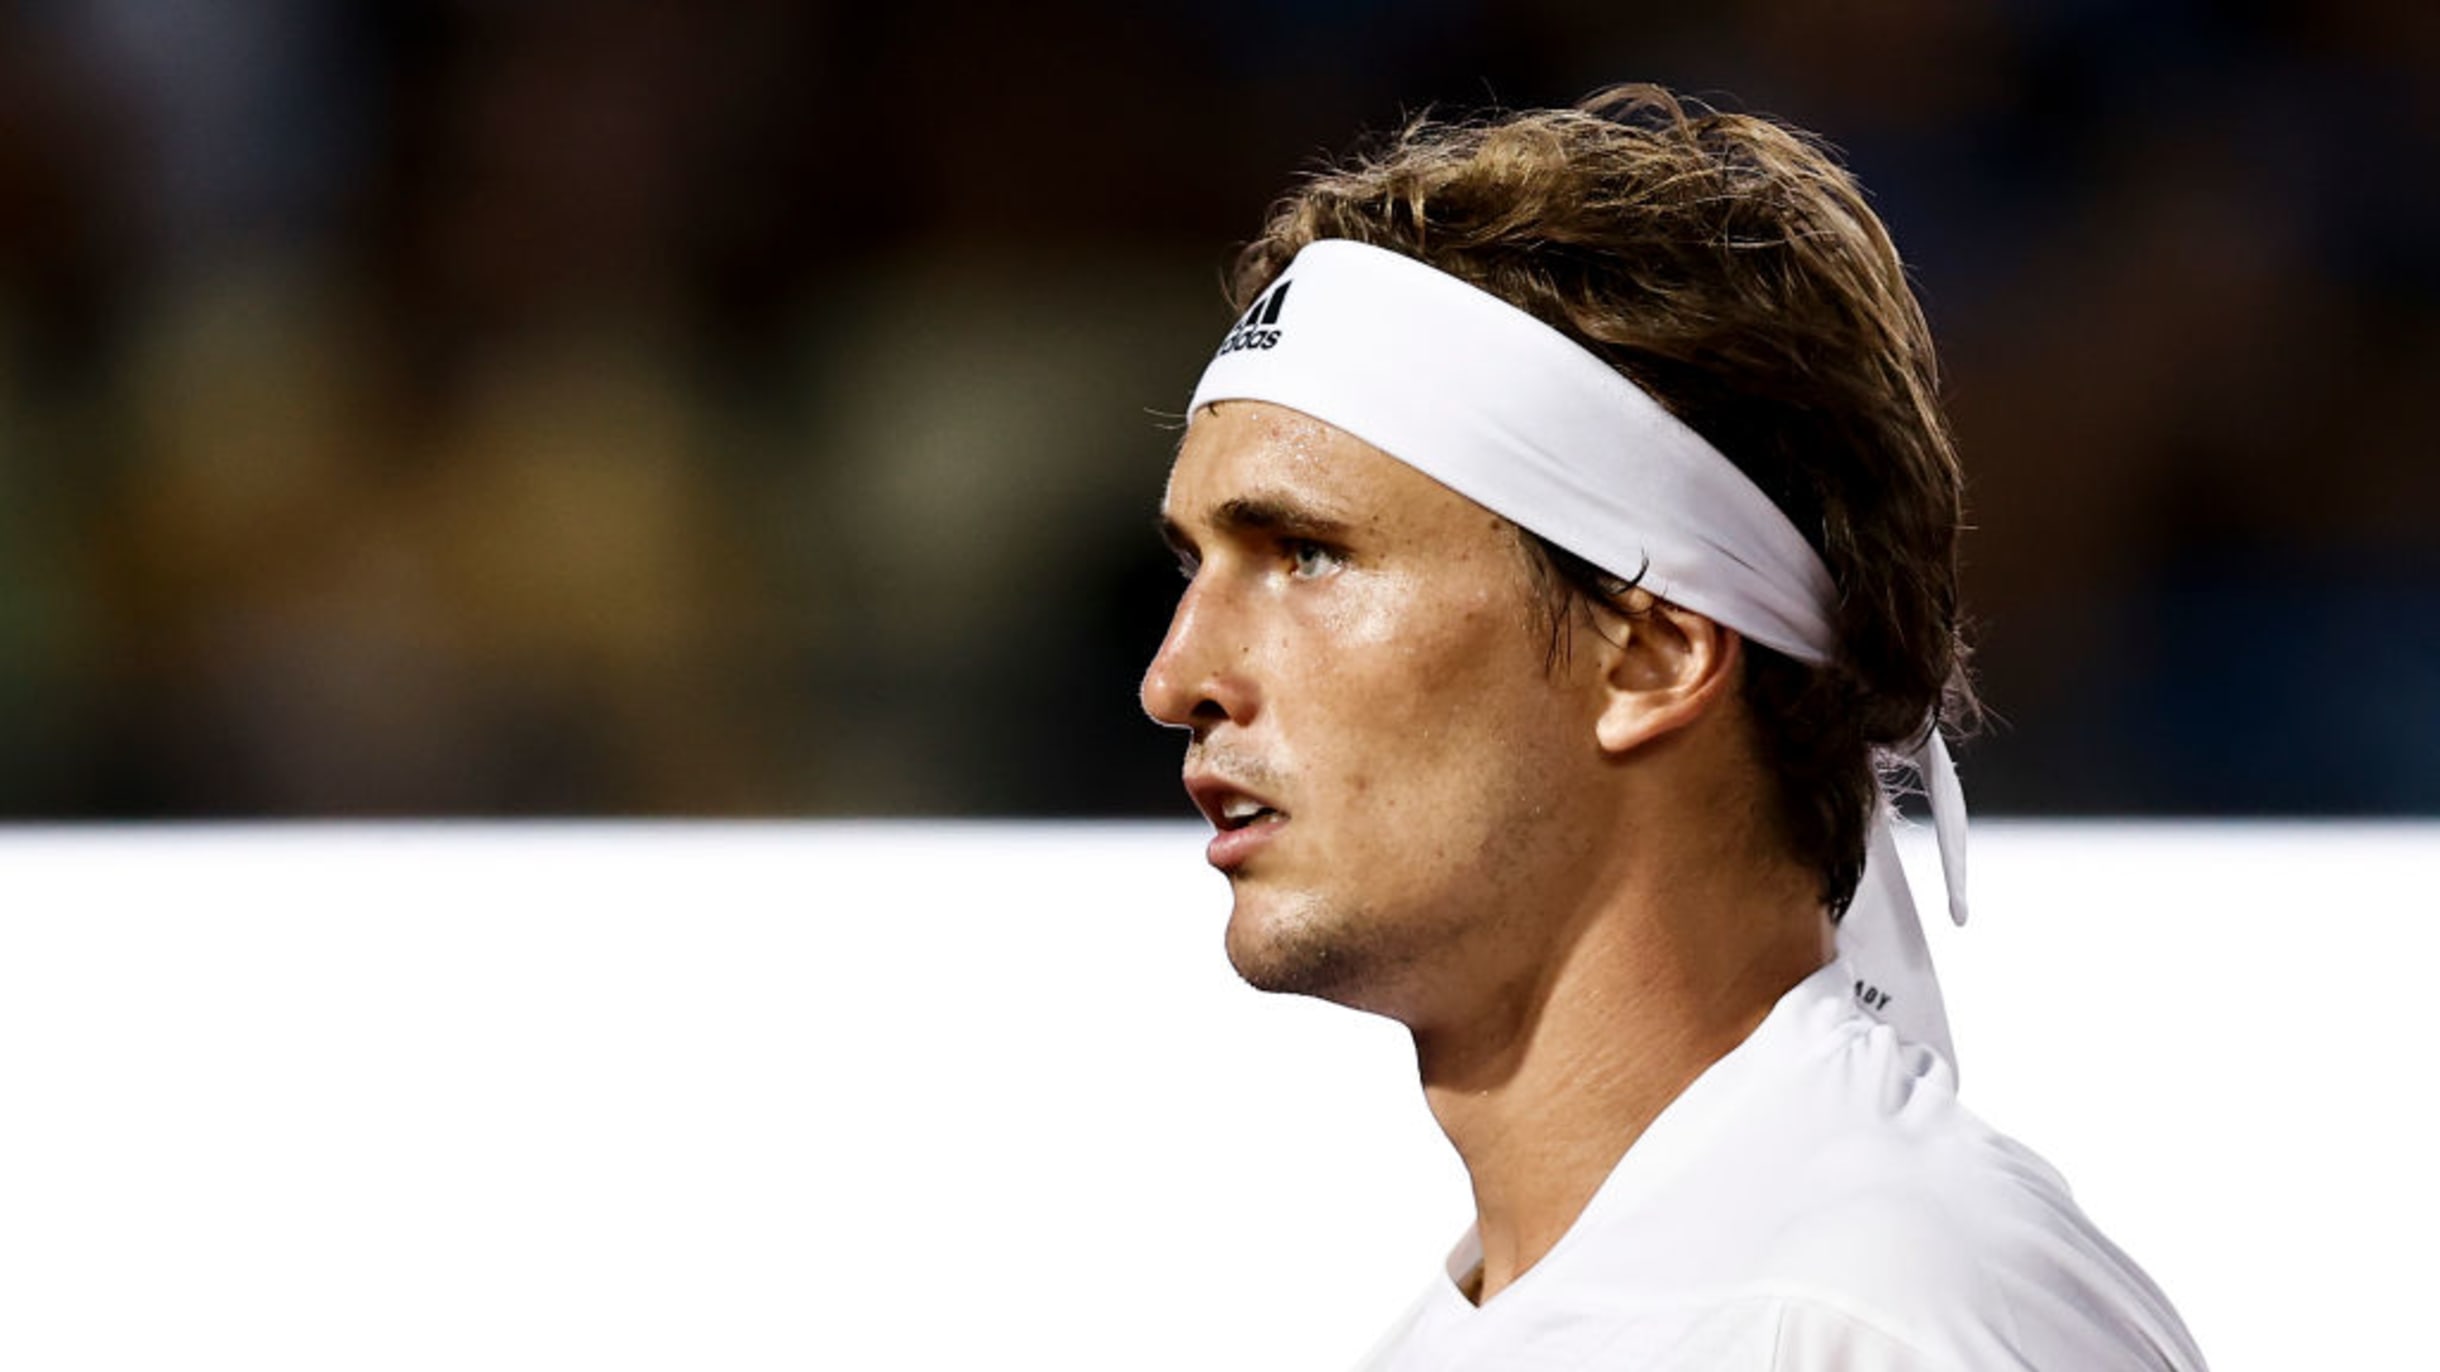 Alexander Zverev on one-year probation after Acapulco tantrum, free to play Indian Wells